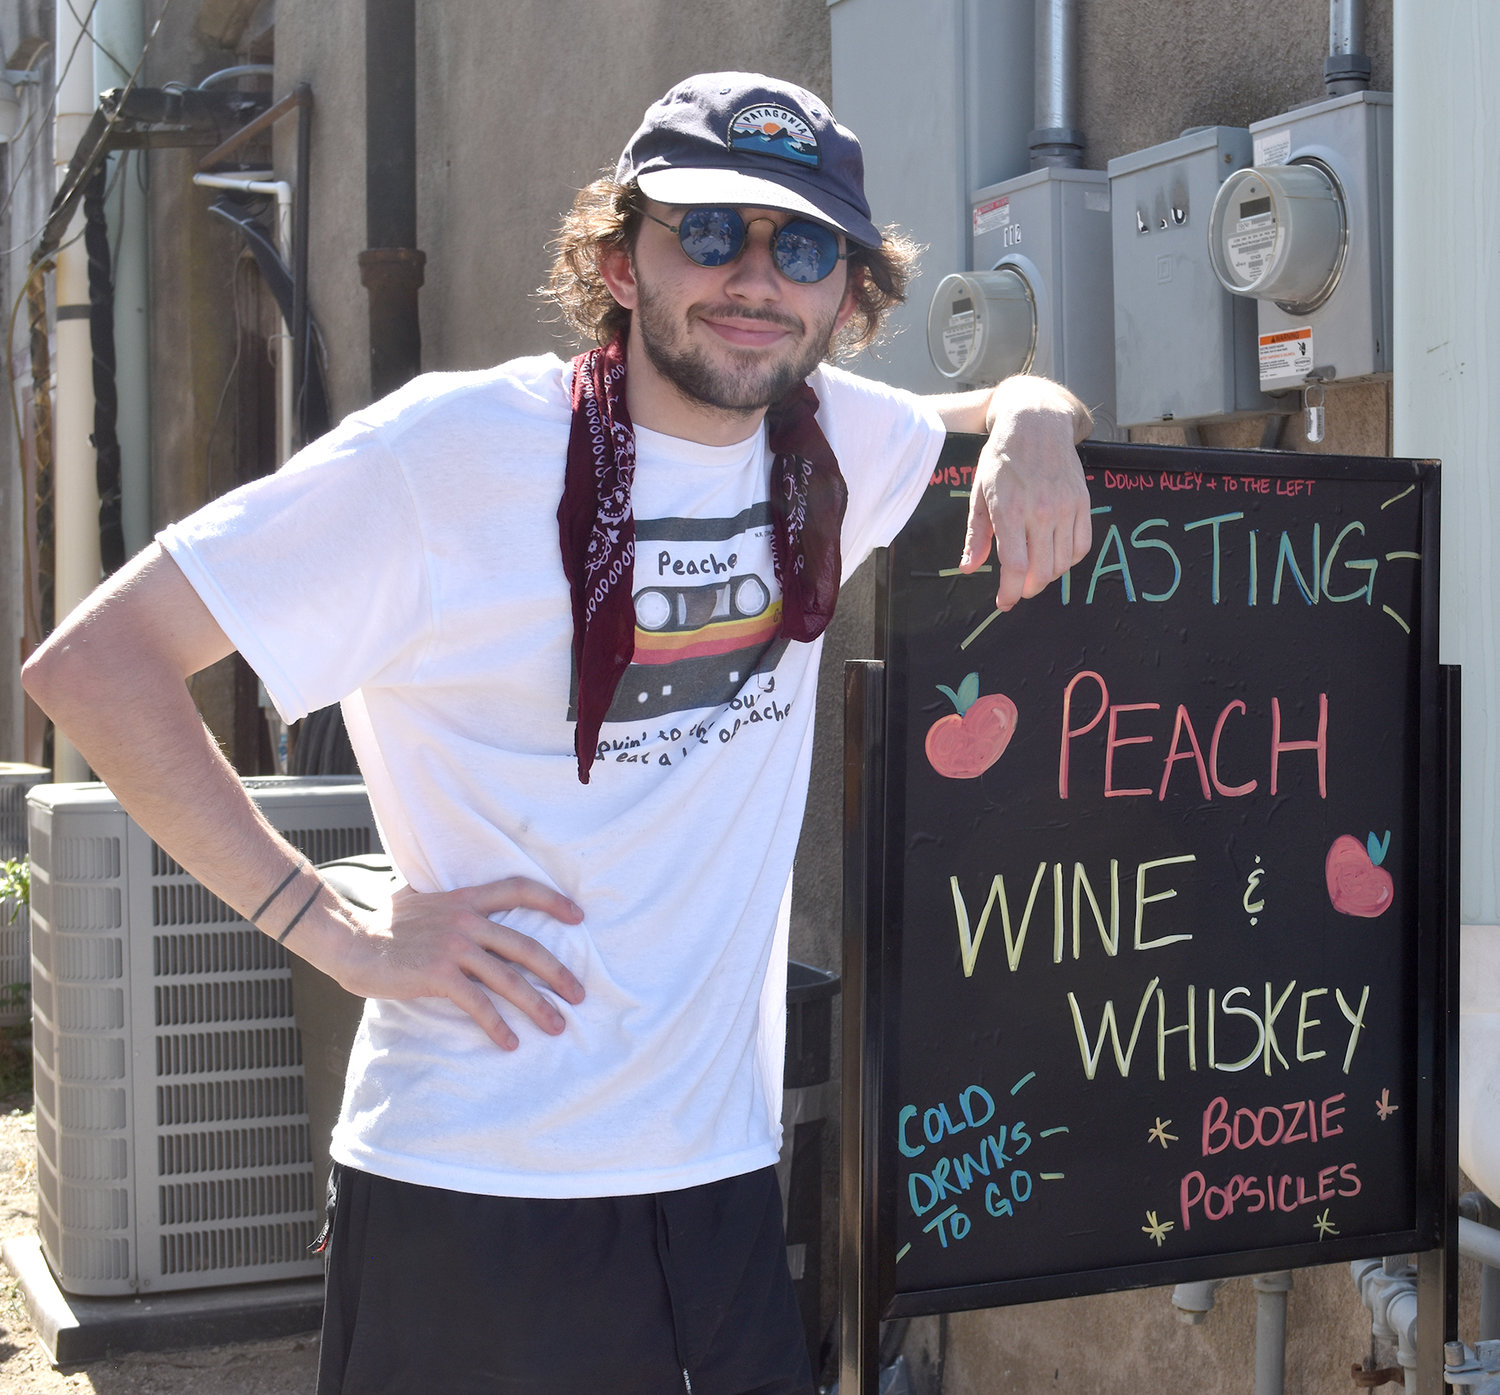 Austin Kennedy of Whiskey Snifter was offering tastings of peach whiskey and wine.